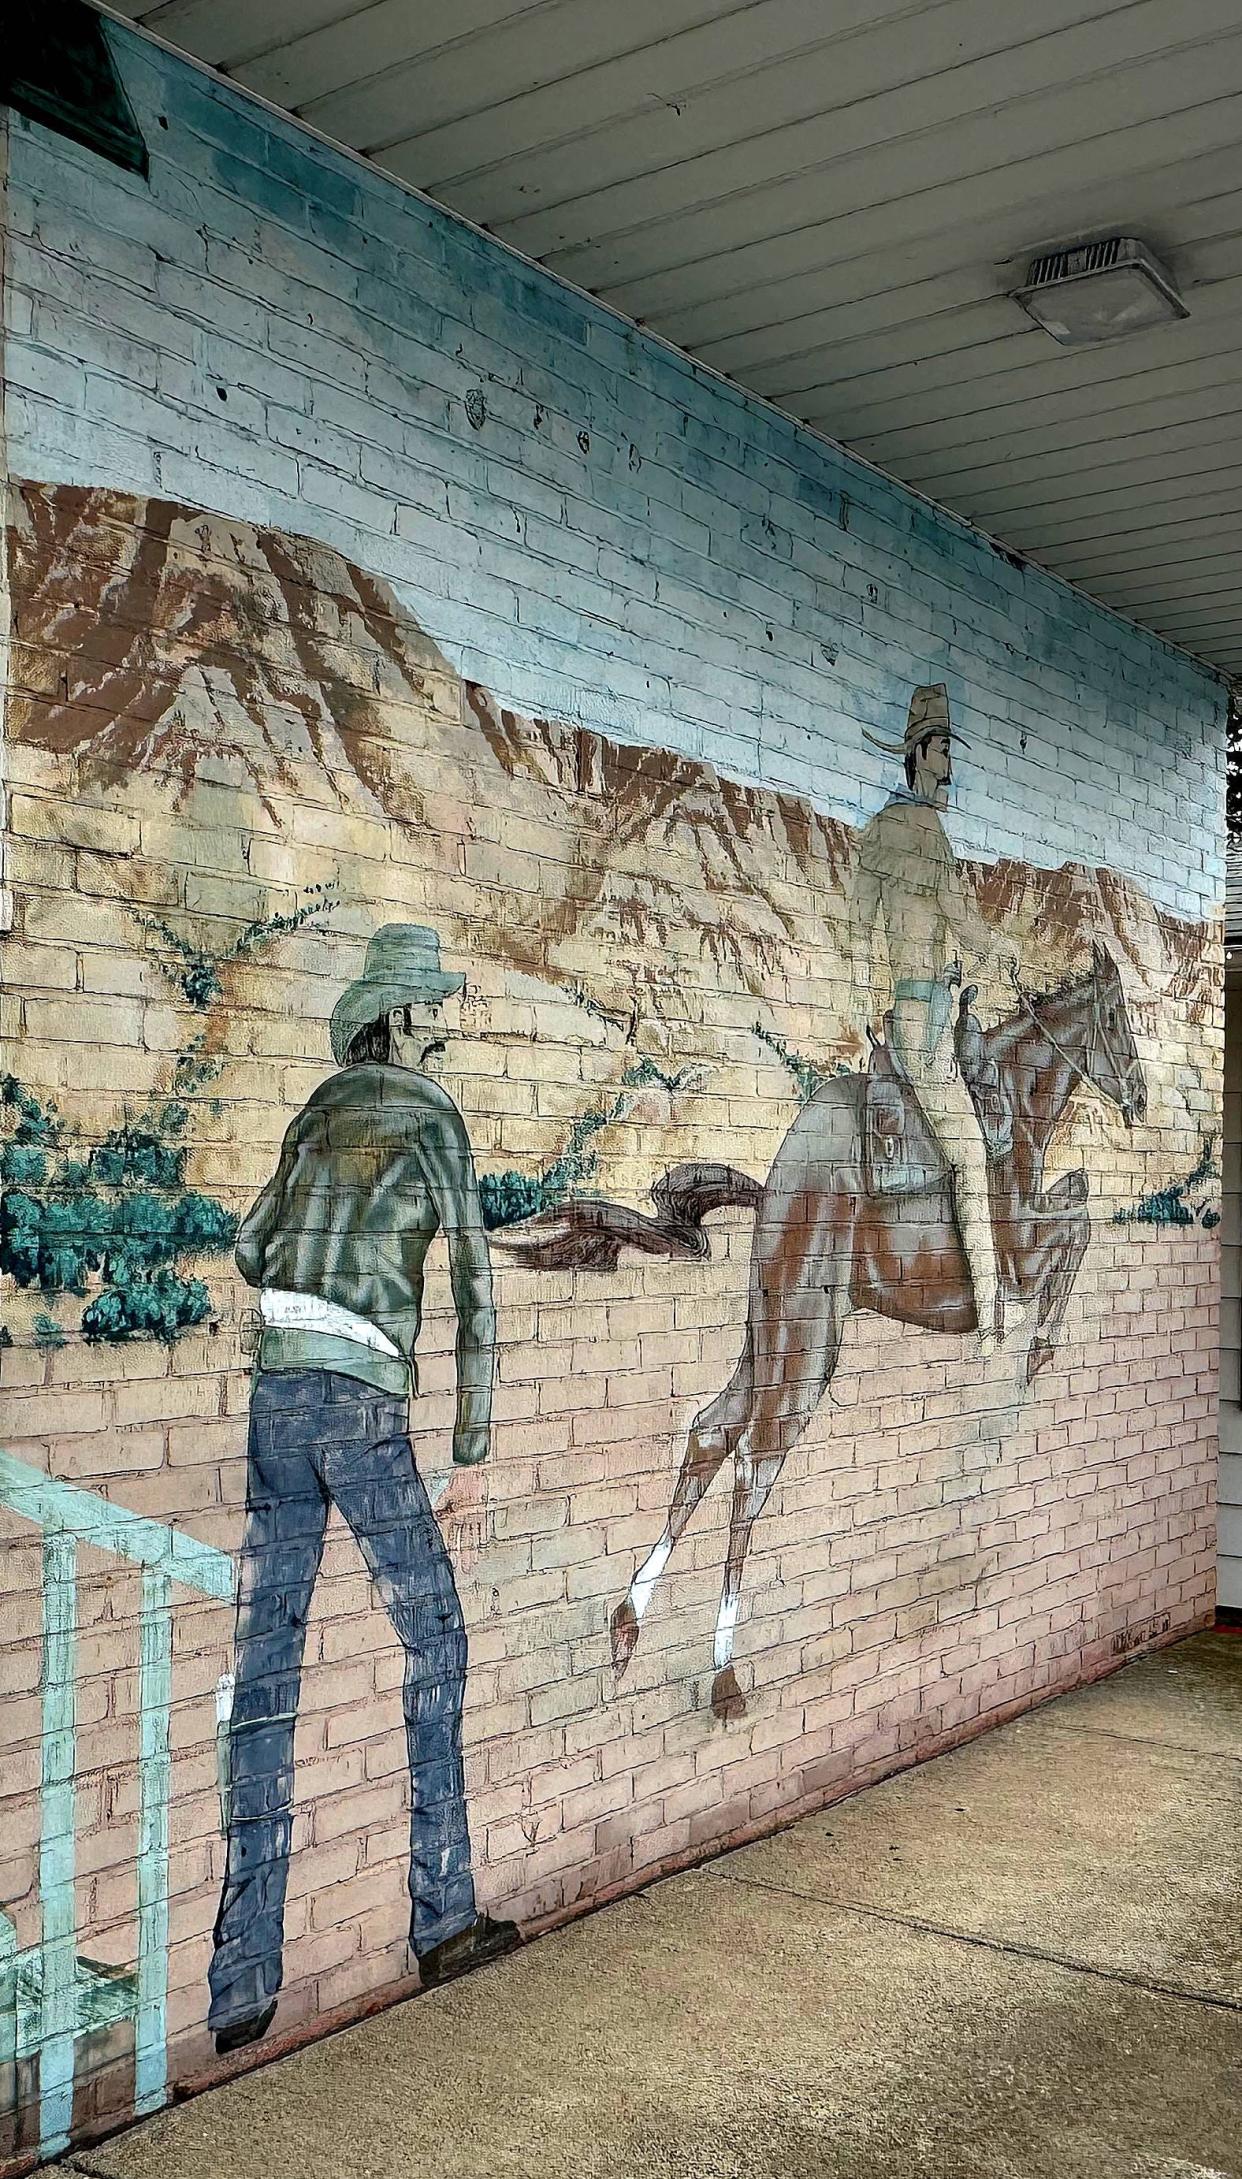 The Pony Express pack and ship store at 1903 W. Eighth St., bears a mural based on its name. The store, which opened in 1986, is for sale by owners Dave and Terry Grab.